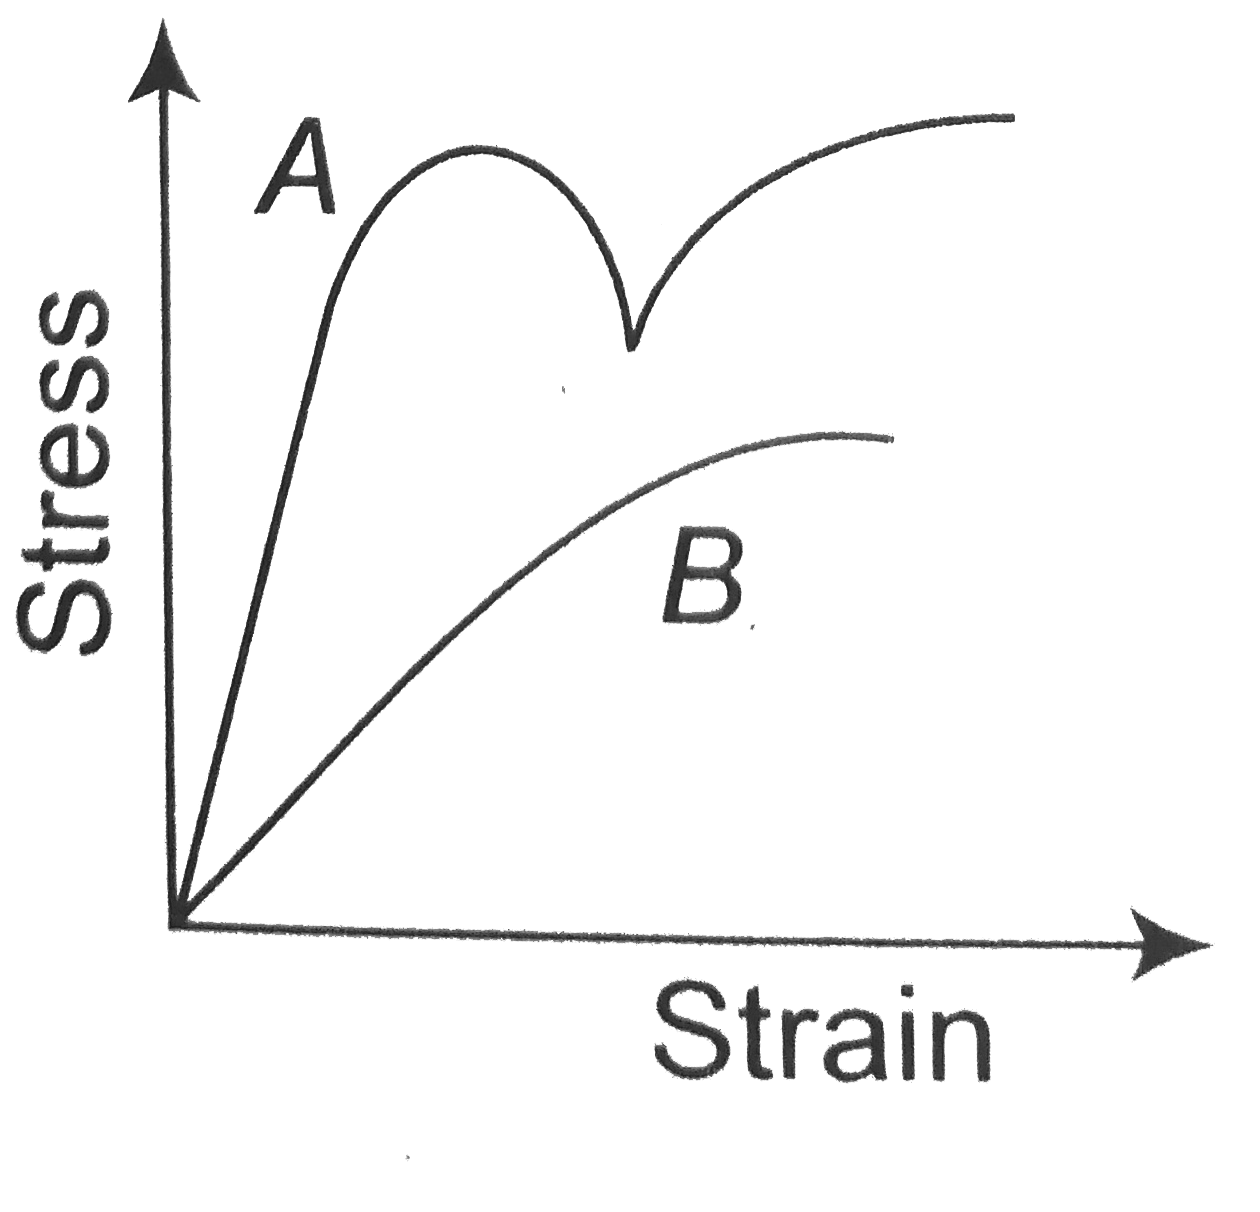 The diagram shoes stress v/s strain curve for the materials A and B. From the curves we infer that